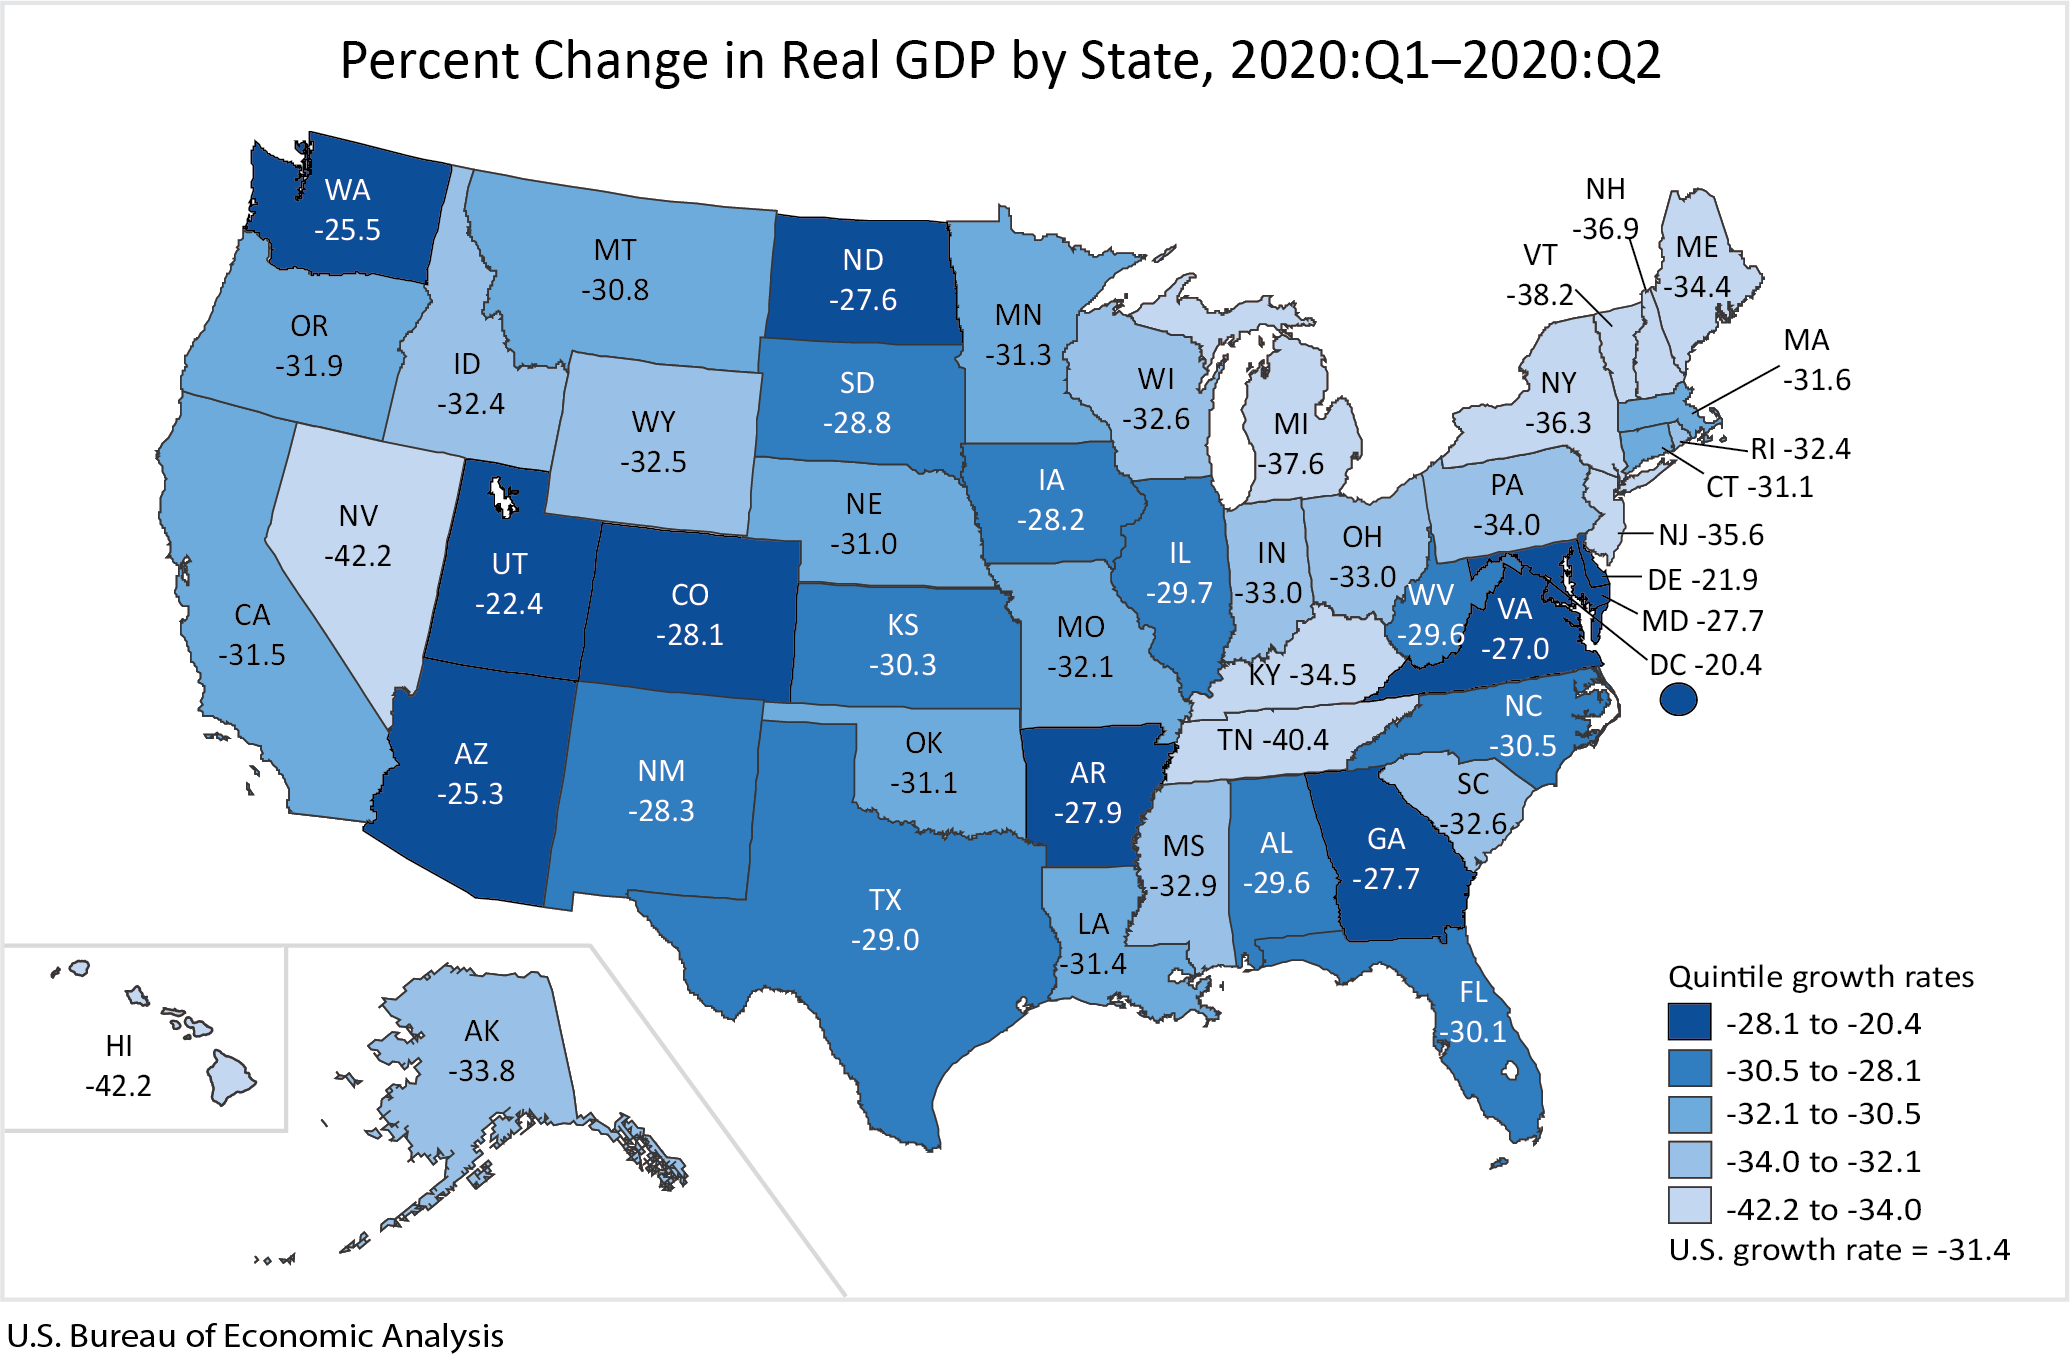 Chart: Percent Change in Real GDP by State, 2020Q1